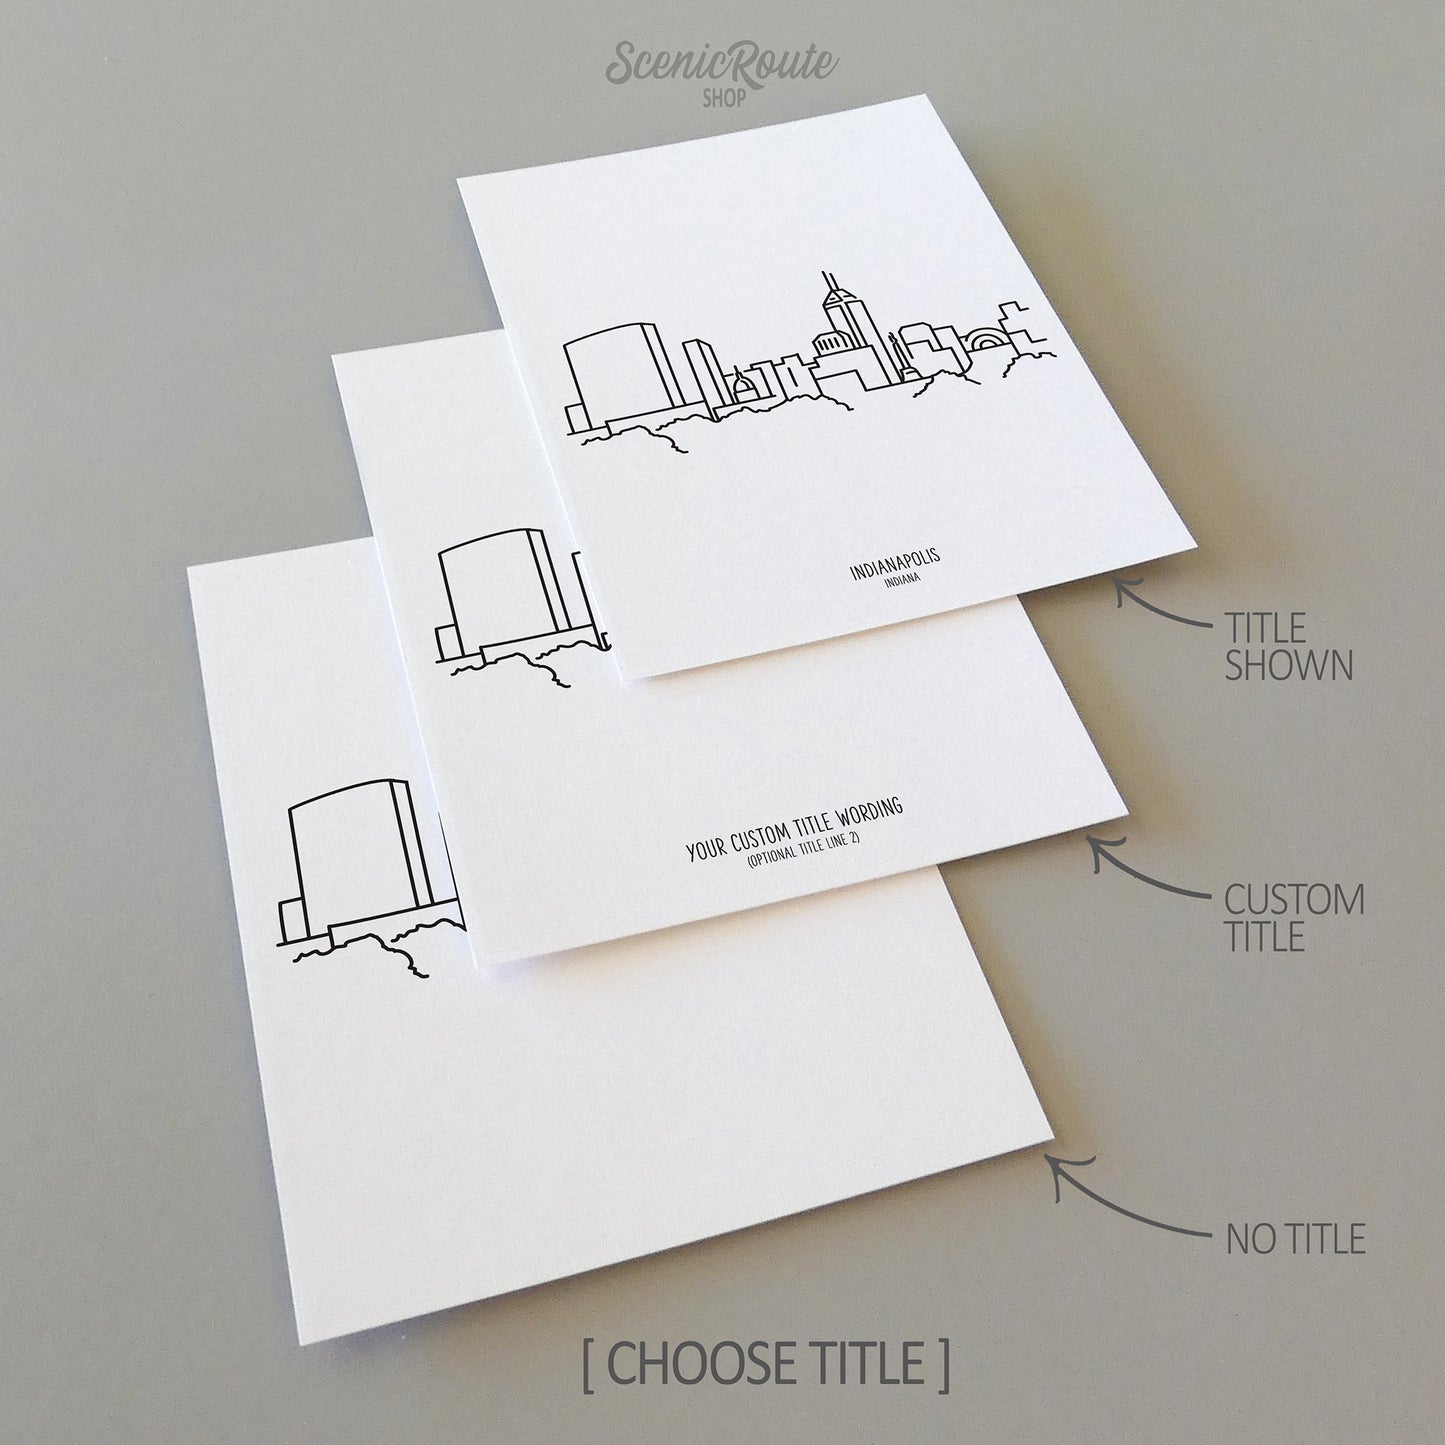 Three line art drawings of the Indianapolis Indiana Skyline on white linen paper with a gray background. The pieces are shown with title options that can be chosen and personalized.